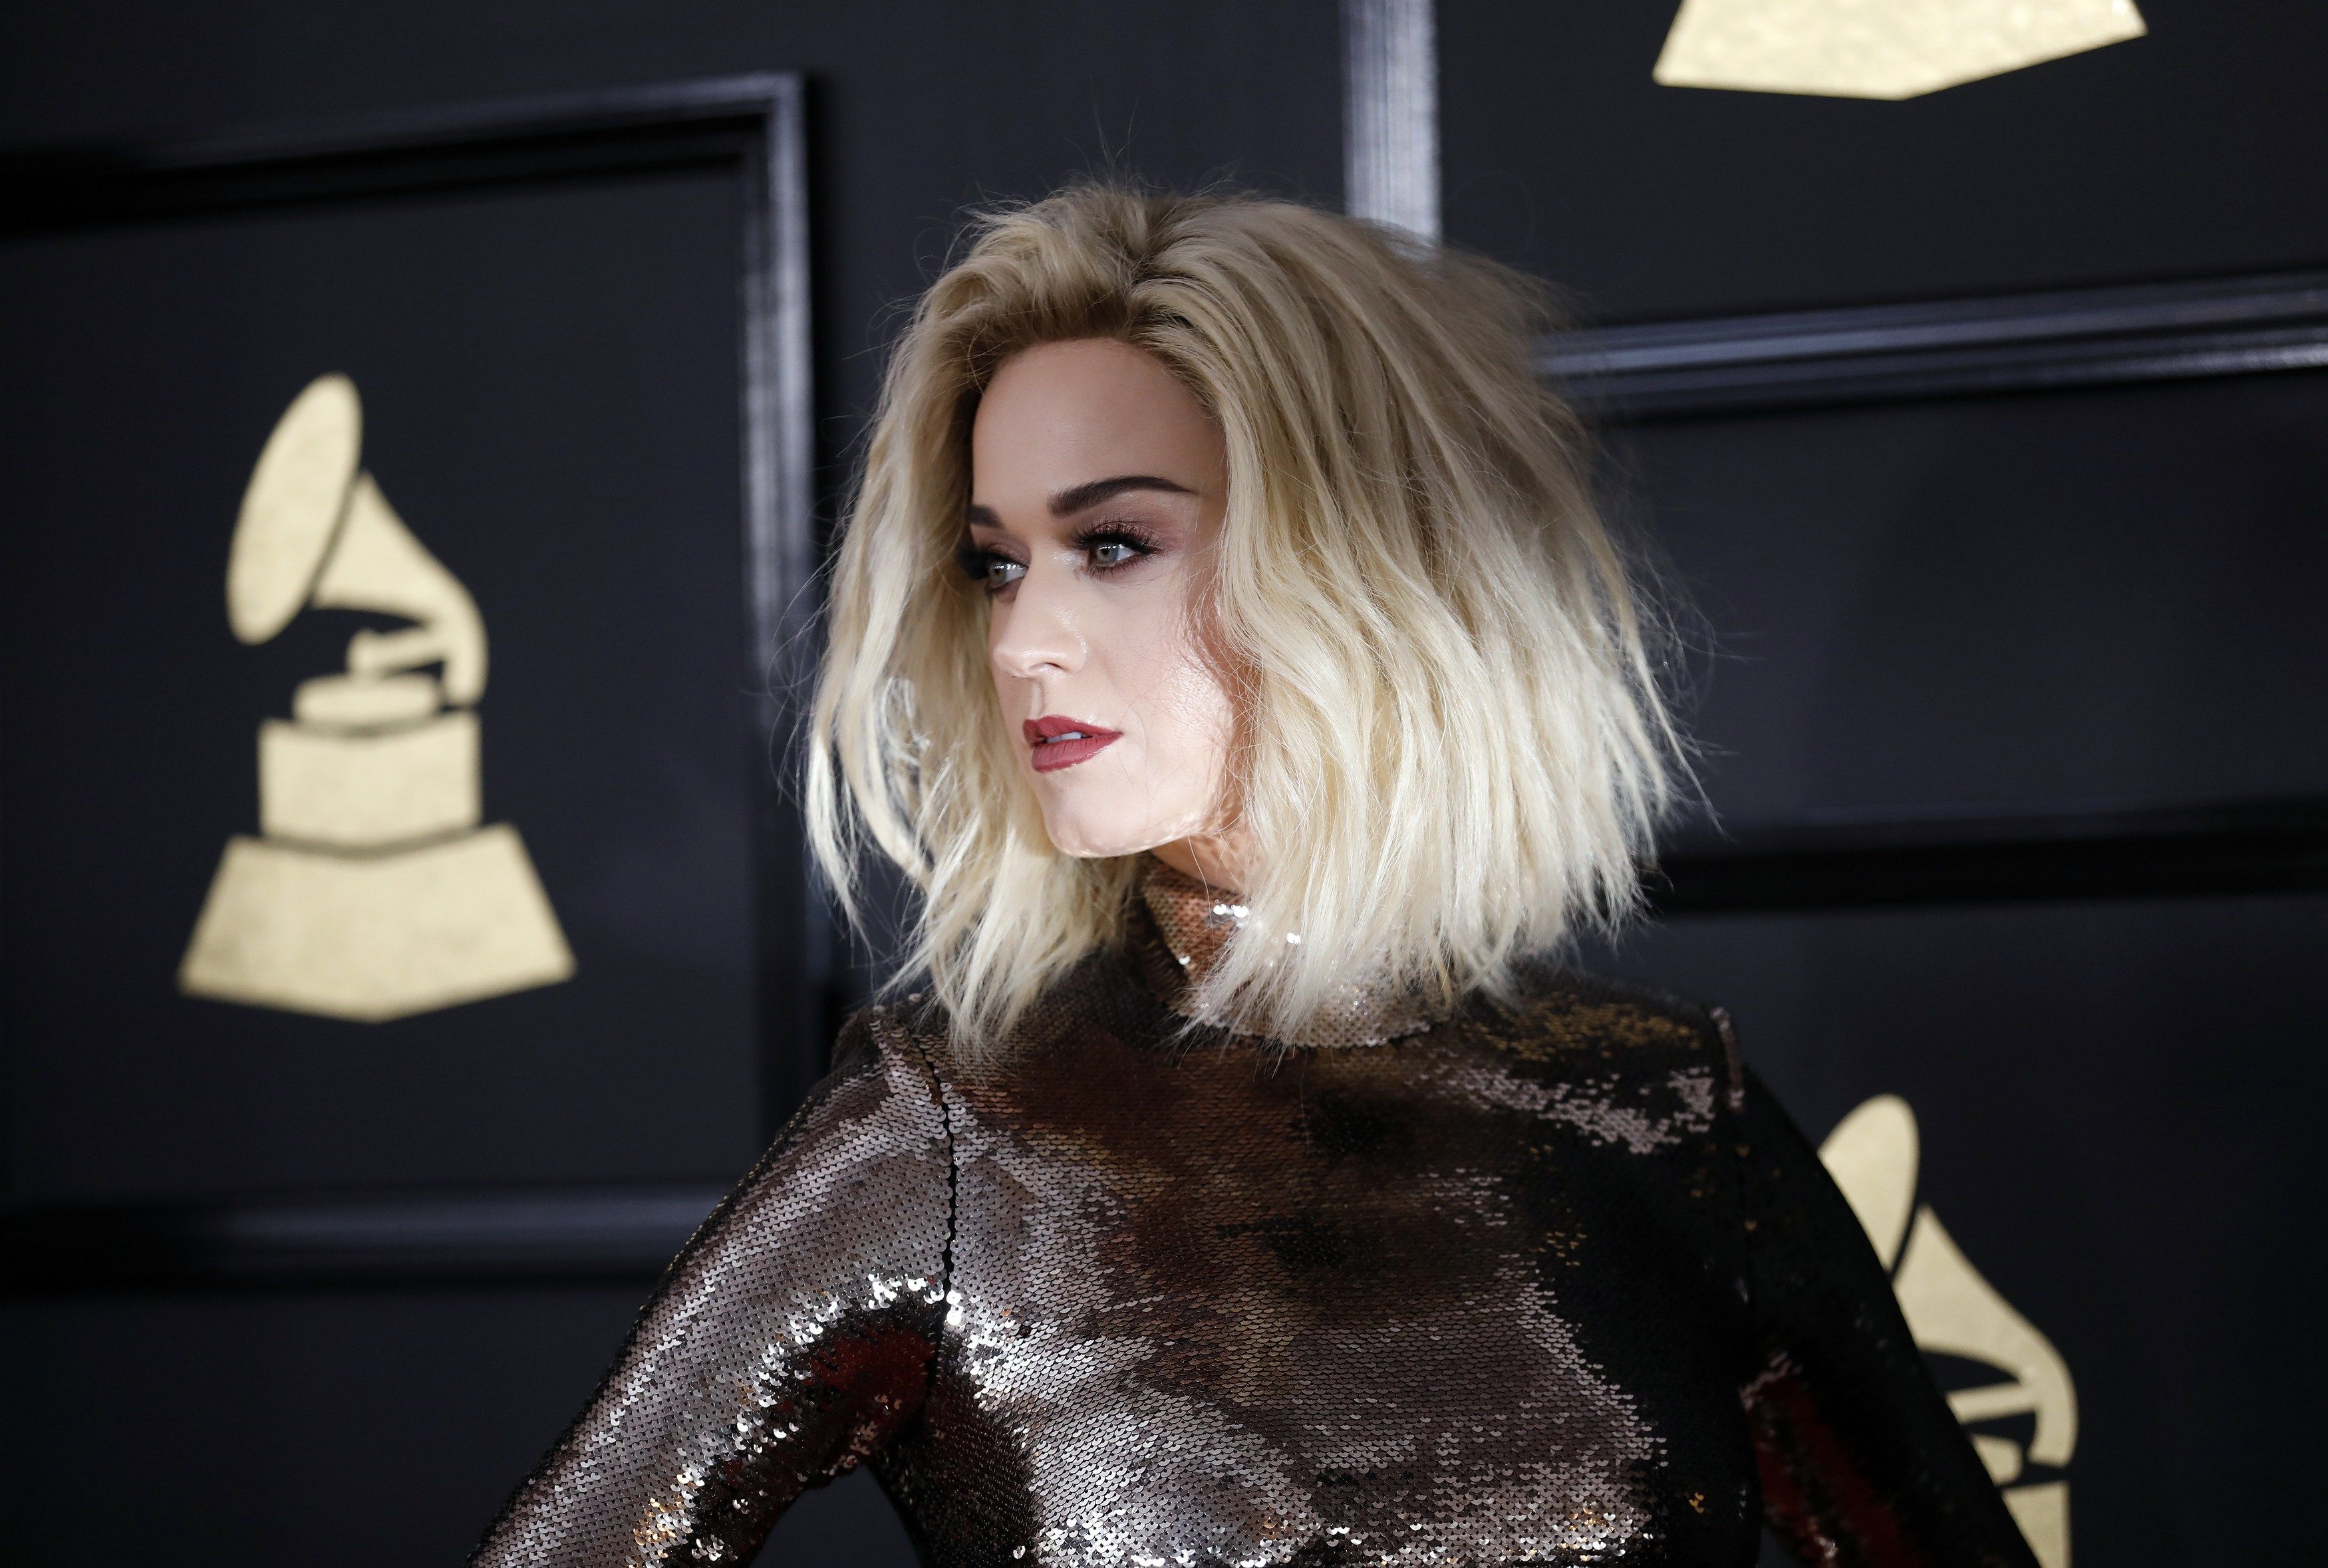 Katy Perry at Grammy Awards 2017 HD Wallpaper. Background Image